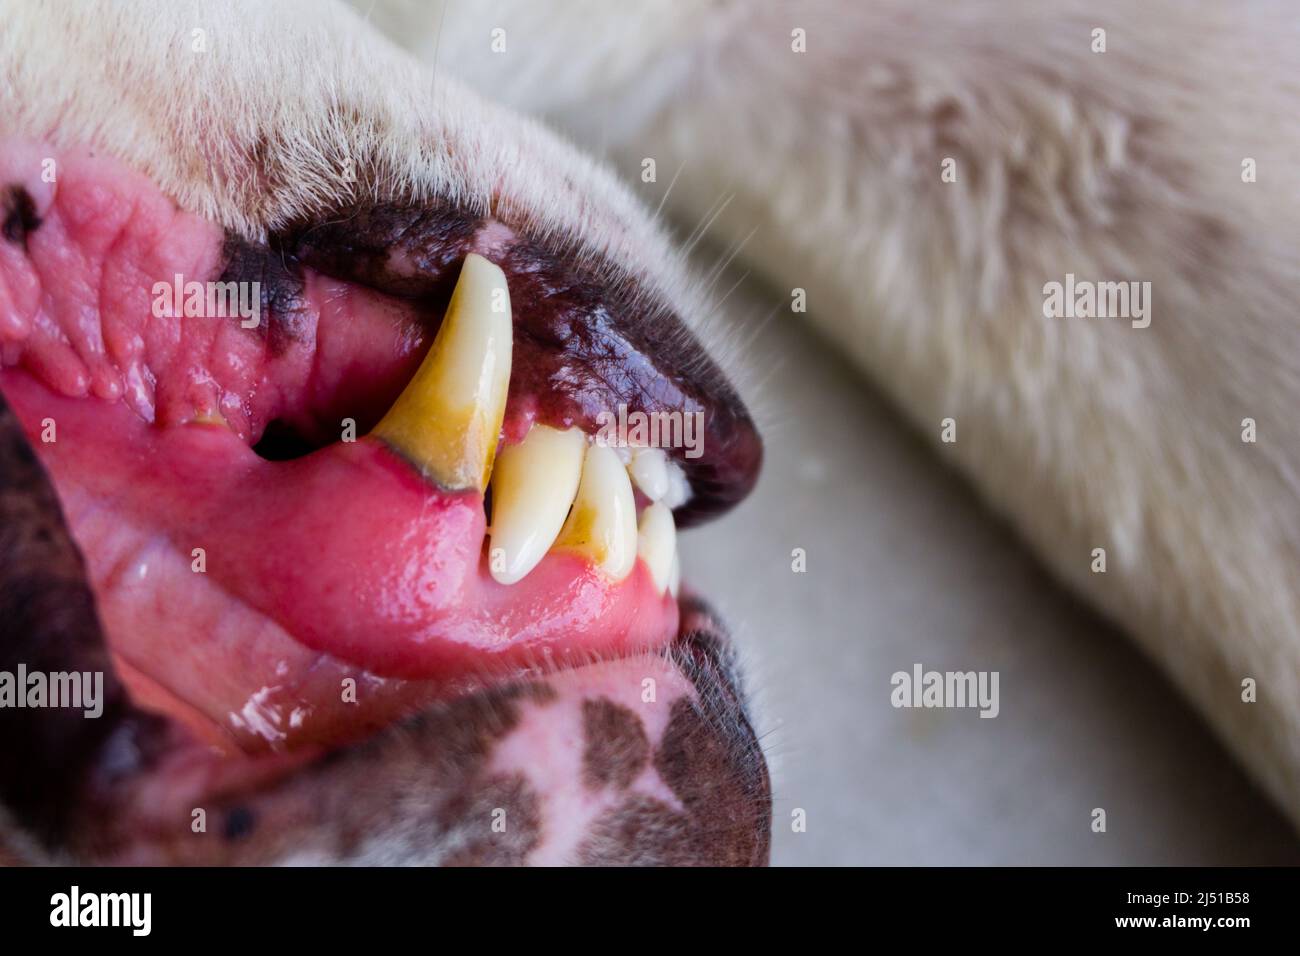 A close up shot of a dog's canine teeth and open jaw skin. Stock Photo